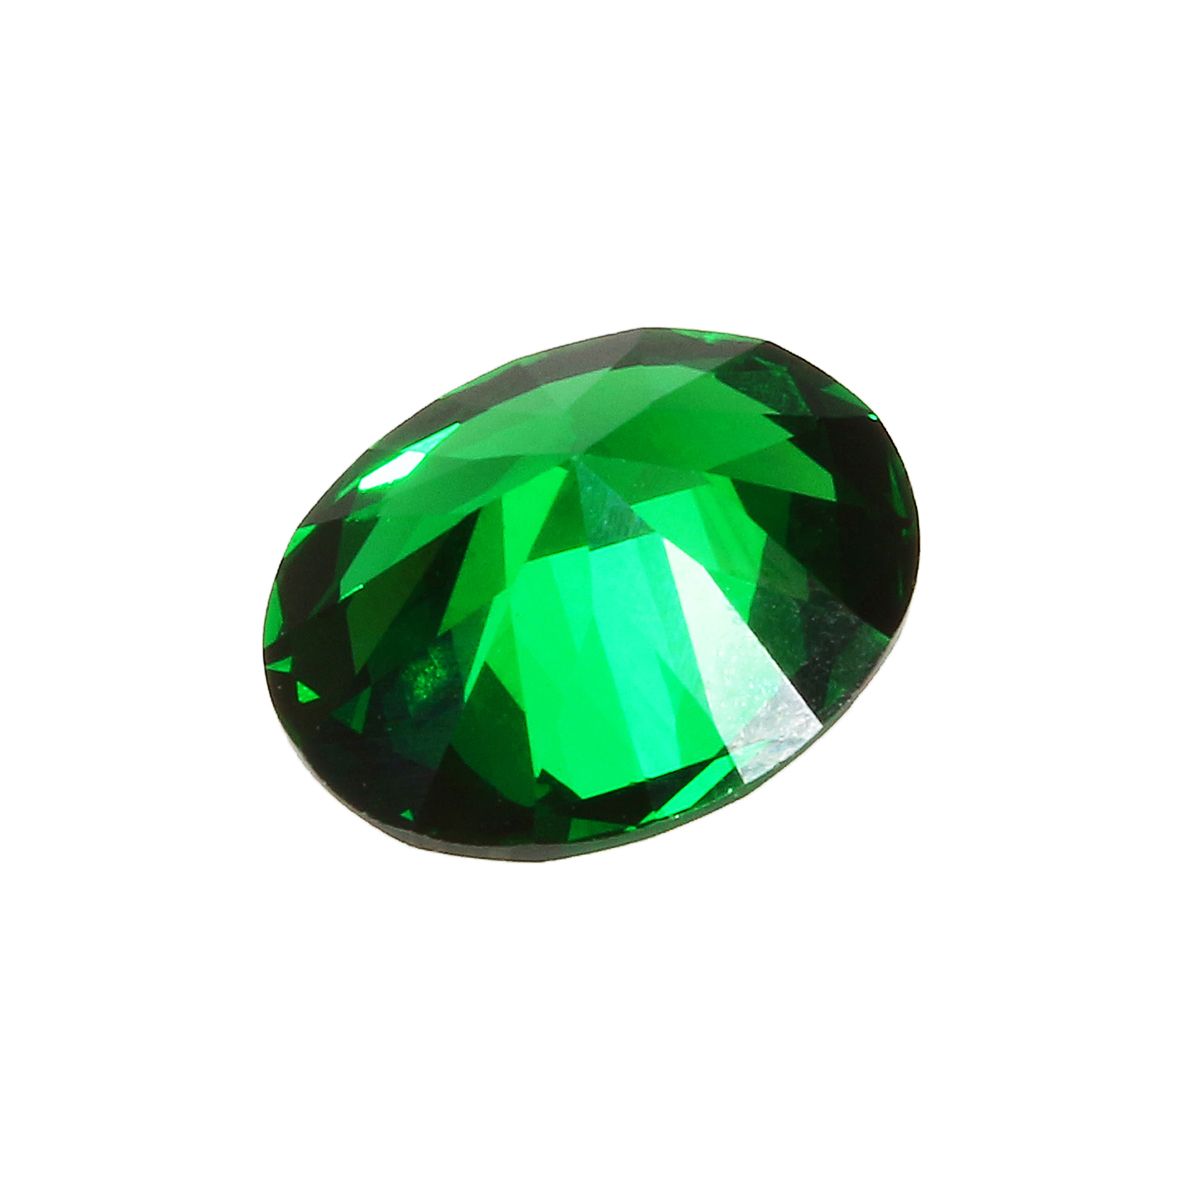 Natural-Mined-Colombia-Green-Emerald-8x10mm-416ct-Oval-Cut-VVS-AAA-Loose-Gems-Decorations-1551410